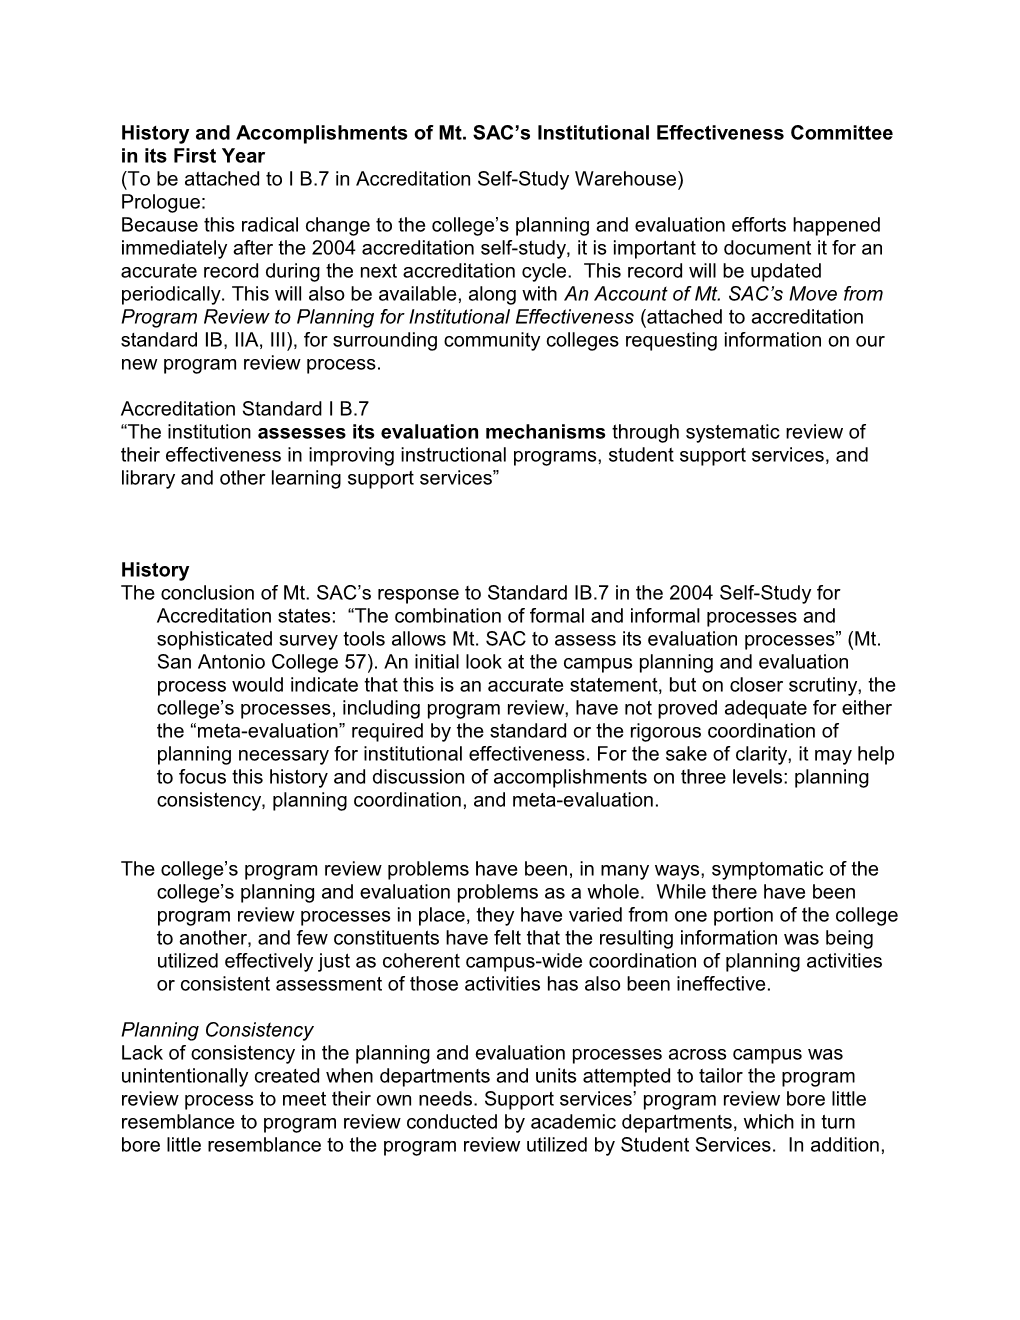 History and Accomplishments of Mt. SAC S Institutional Effectiveness Committee in Its